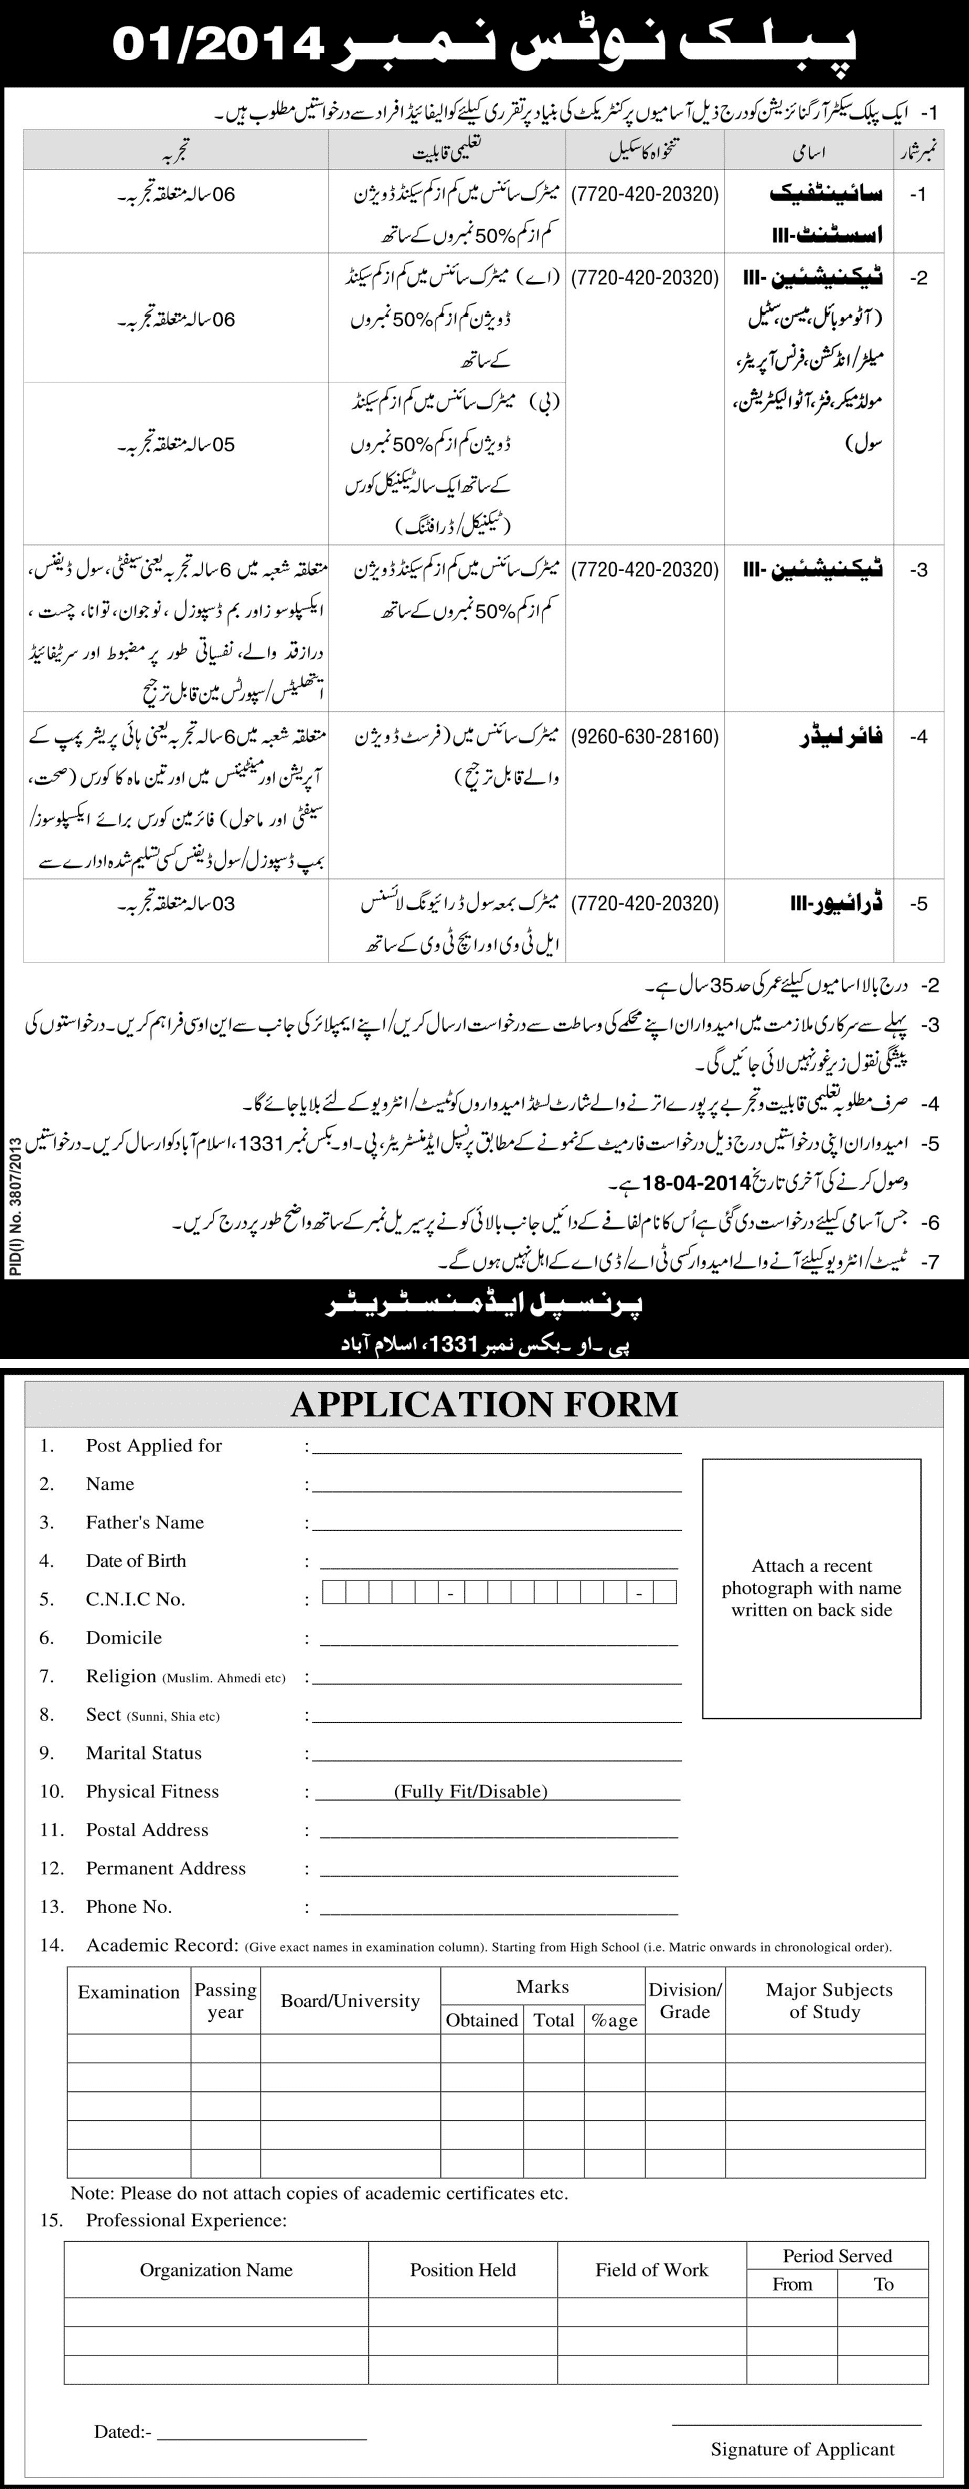 PO Box 1331 Islamabad Jobs 2014 March / April in Public Sector Organization Application Form